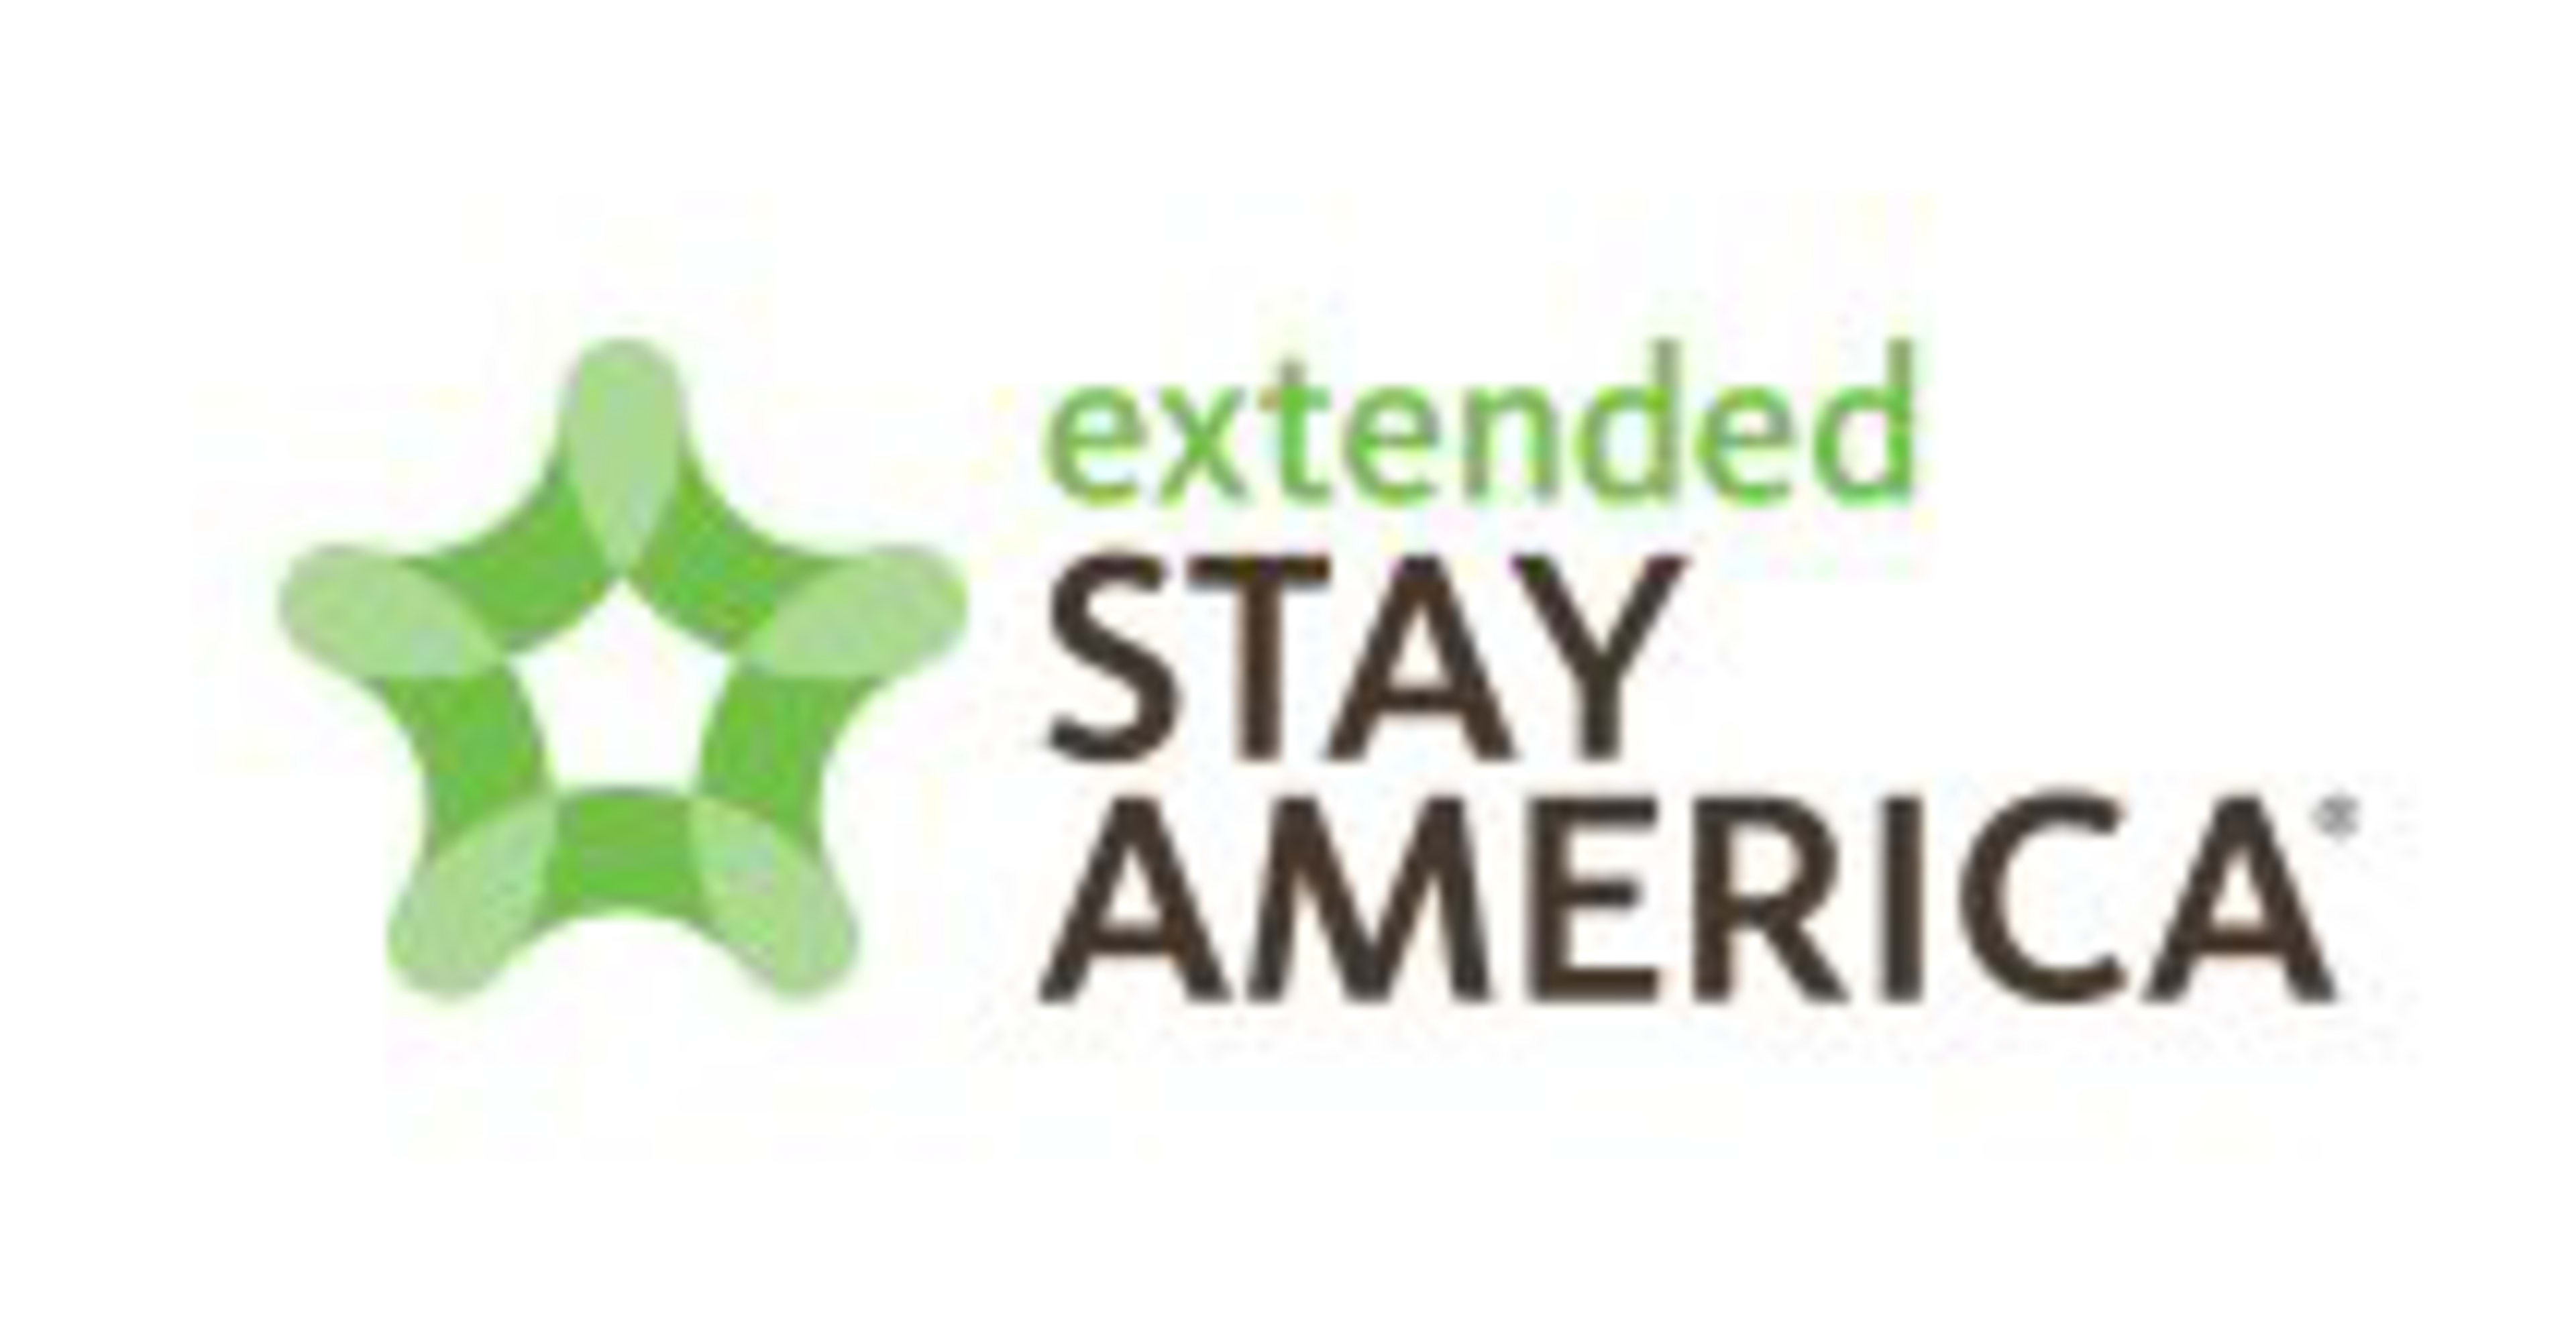 Extended Stay AmericaCode